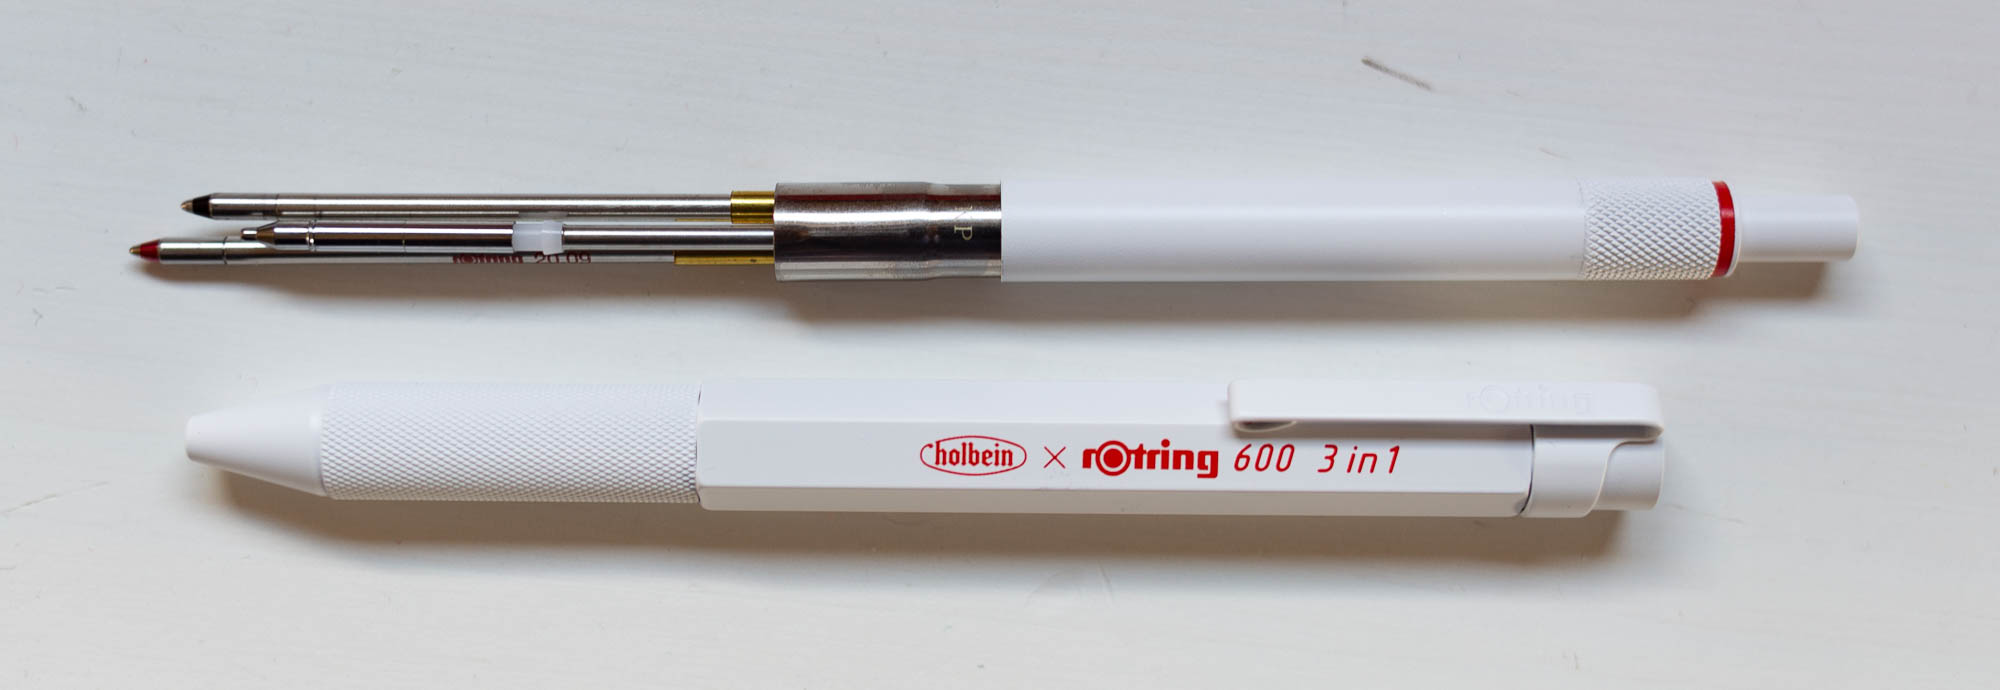 Holbein x Rotring 600 3 in 1 120th anniversary pen - Bleistift